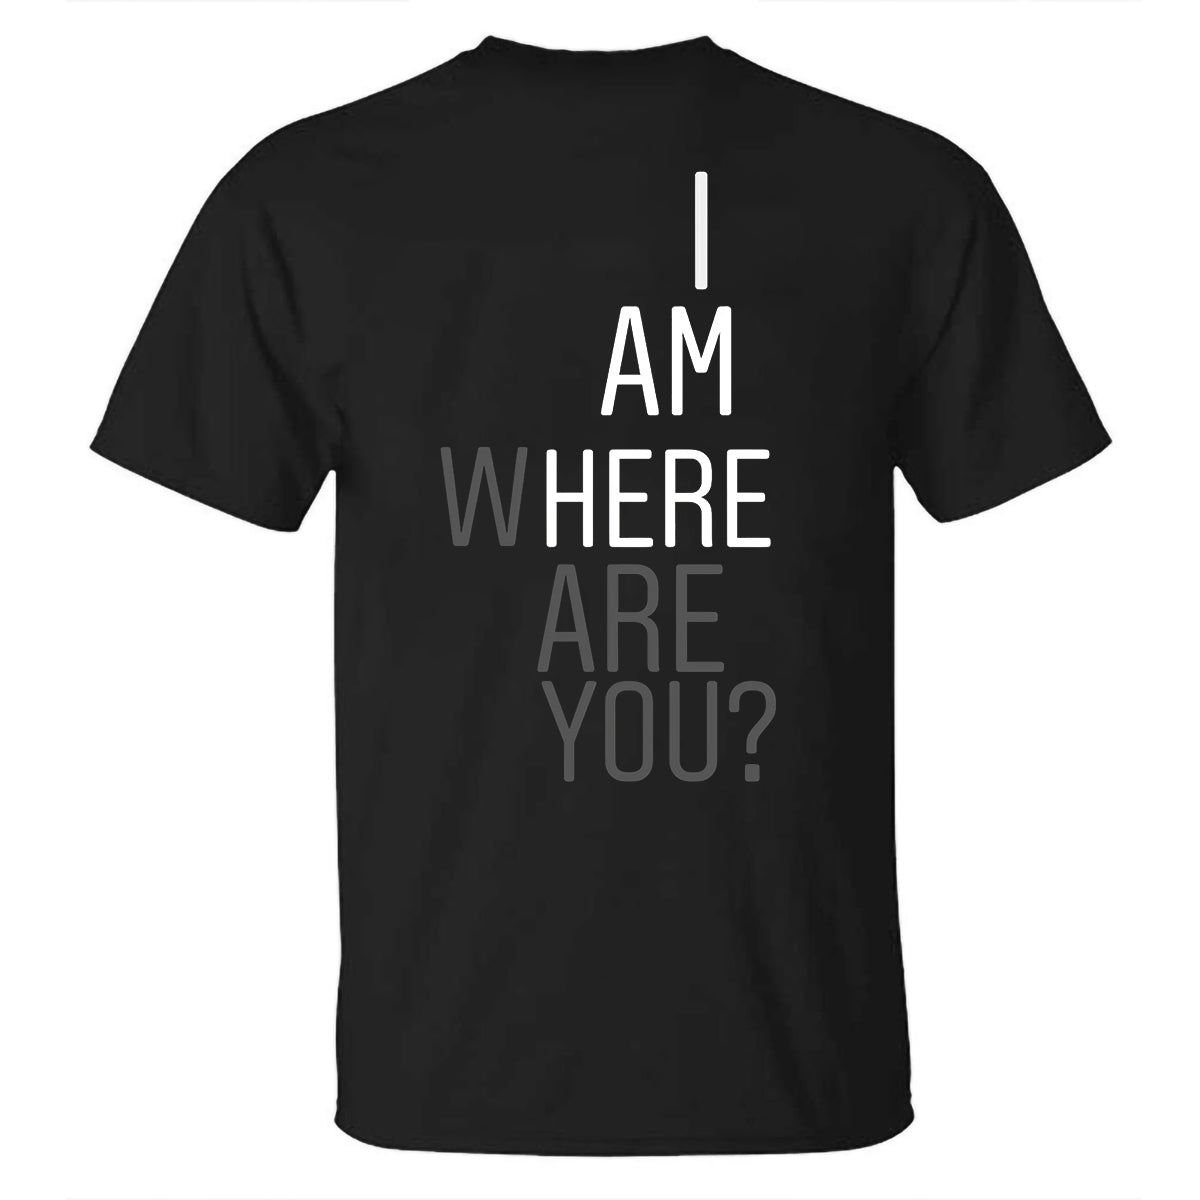 I Am Here Where Are You? Printed T-shirt